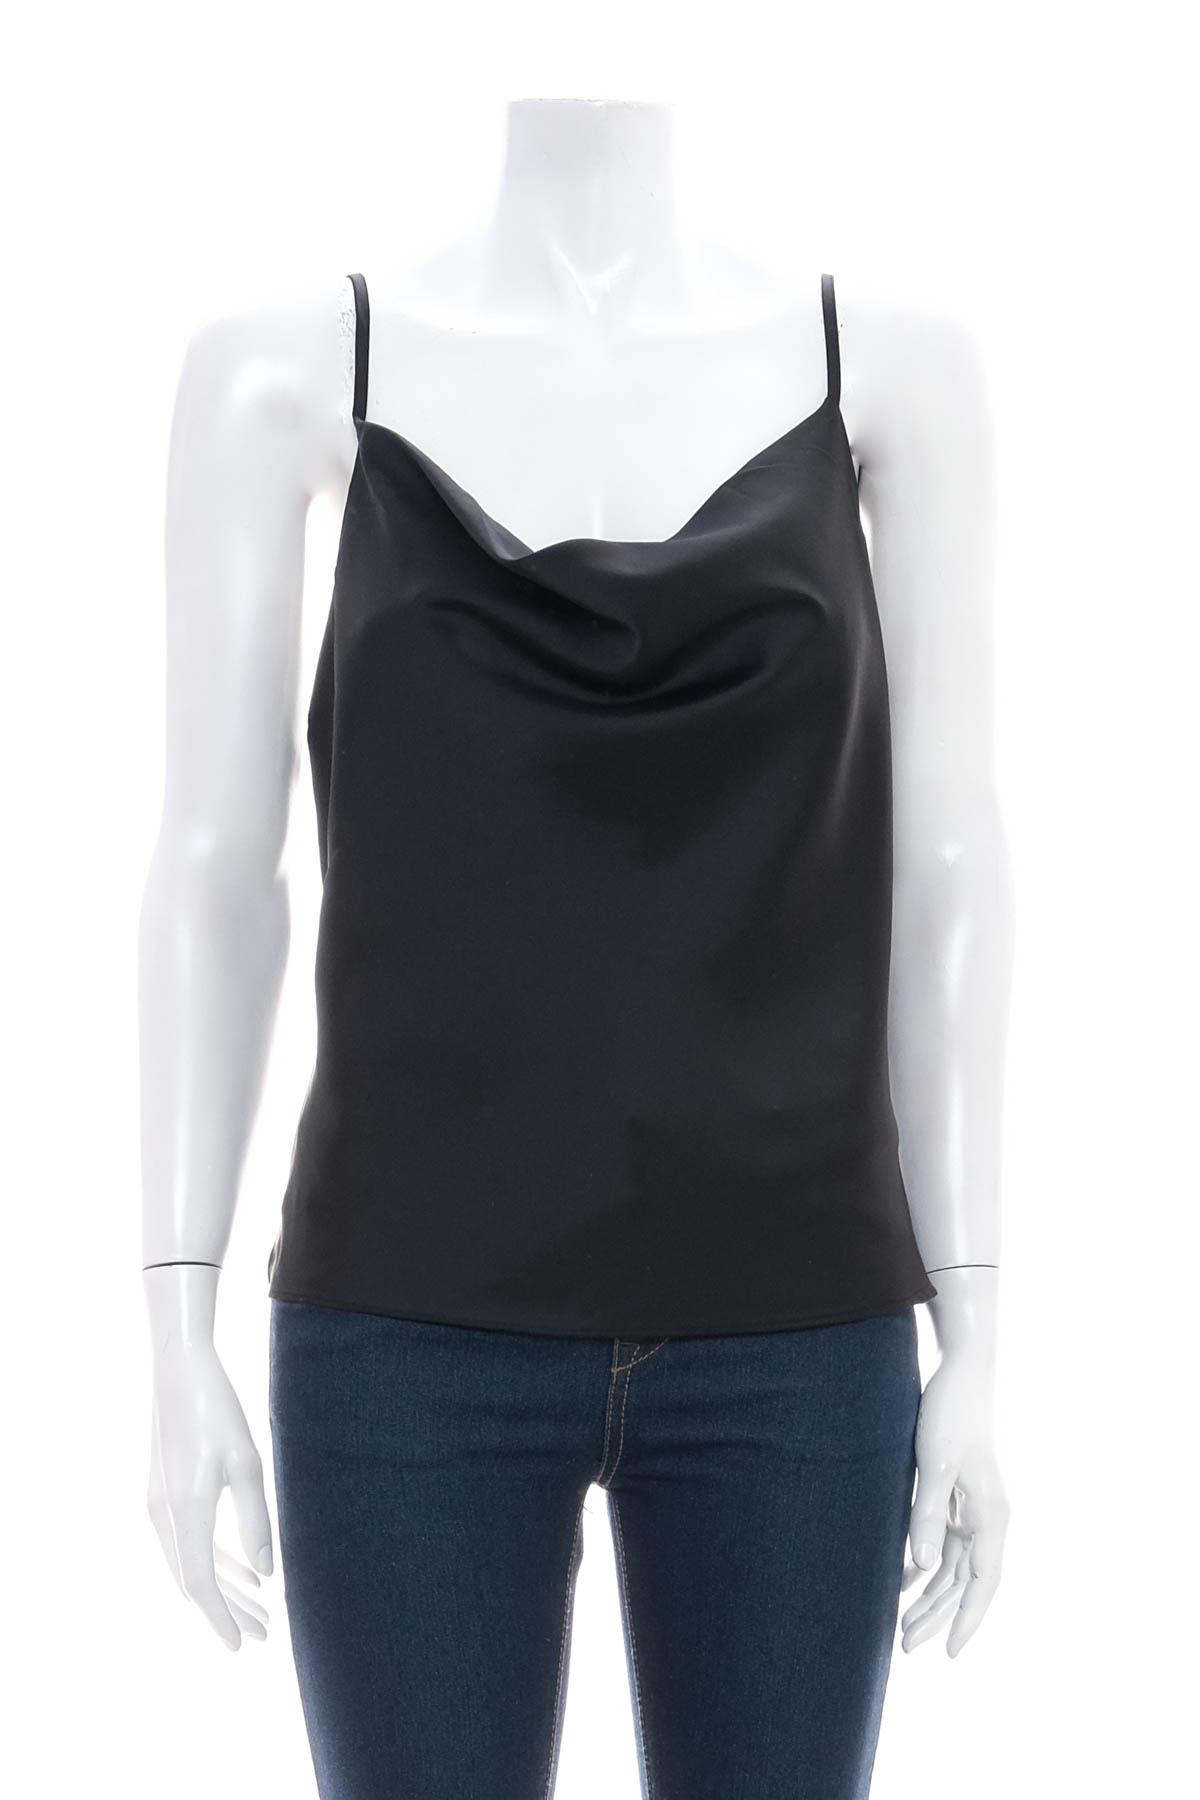 Women's top - Gina Tricot - 0